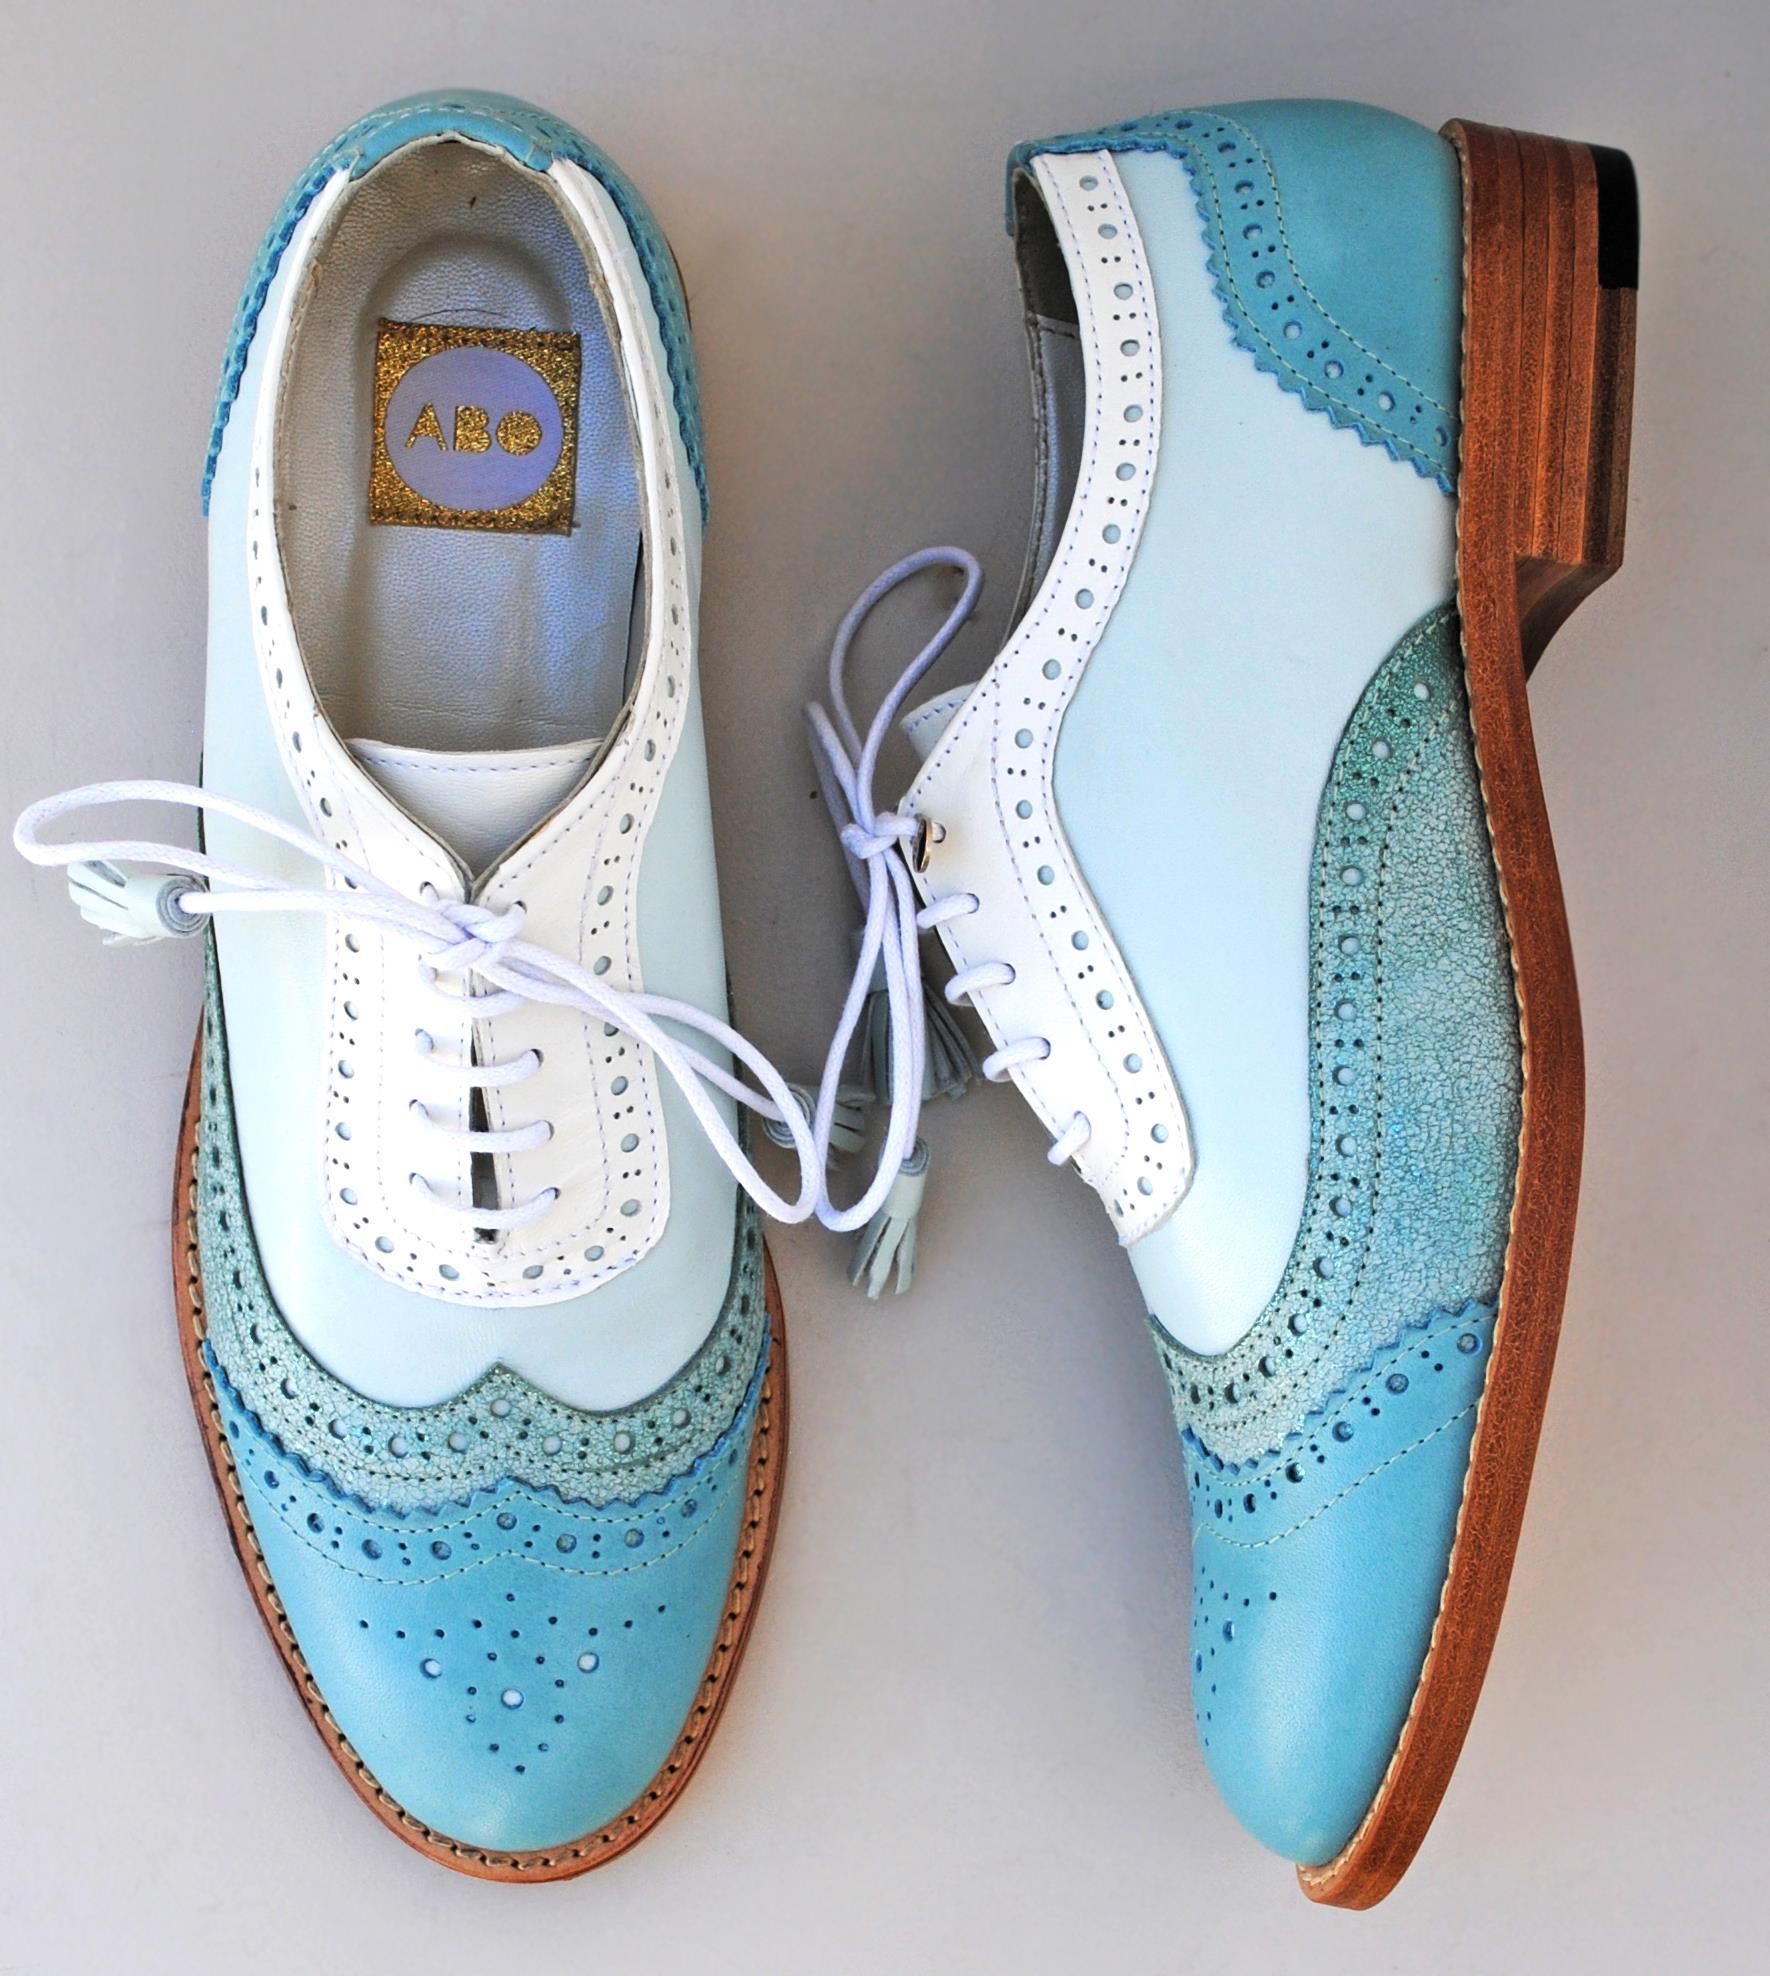 How to Wear Wingtip Oxfords: Best 13 Unisex Outfit Ideas for Women